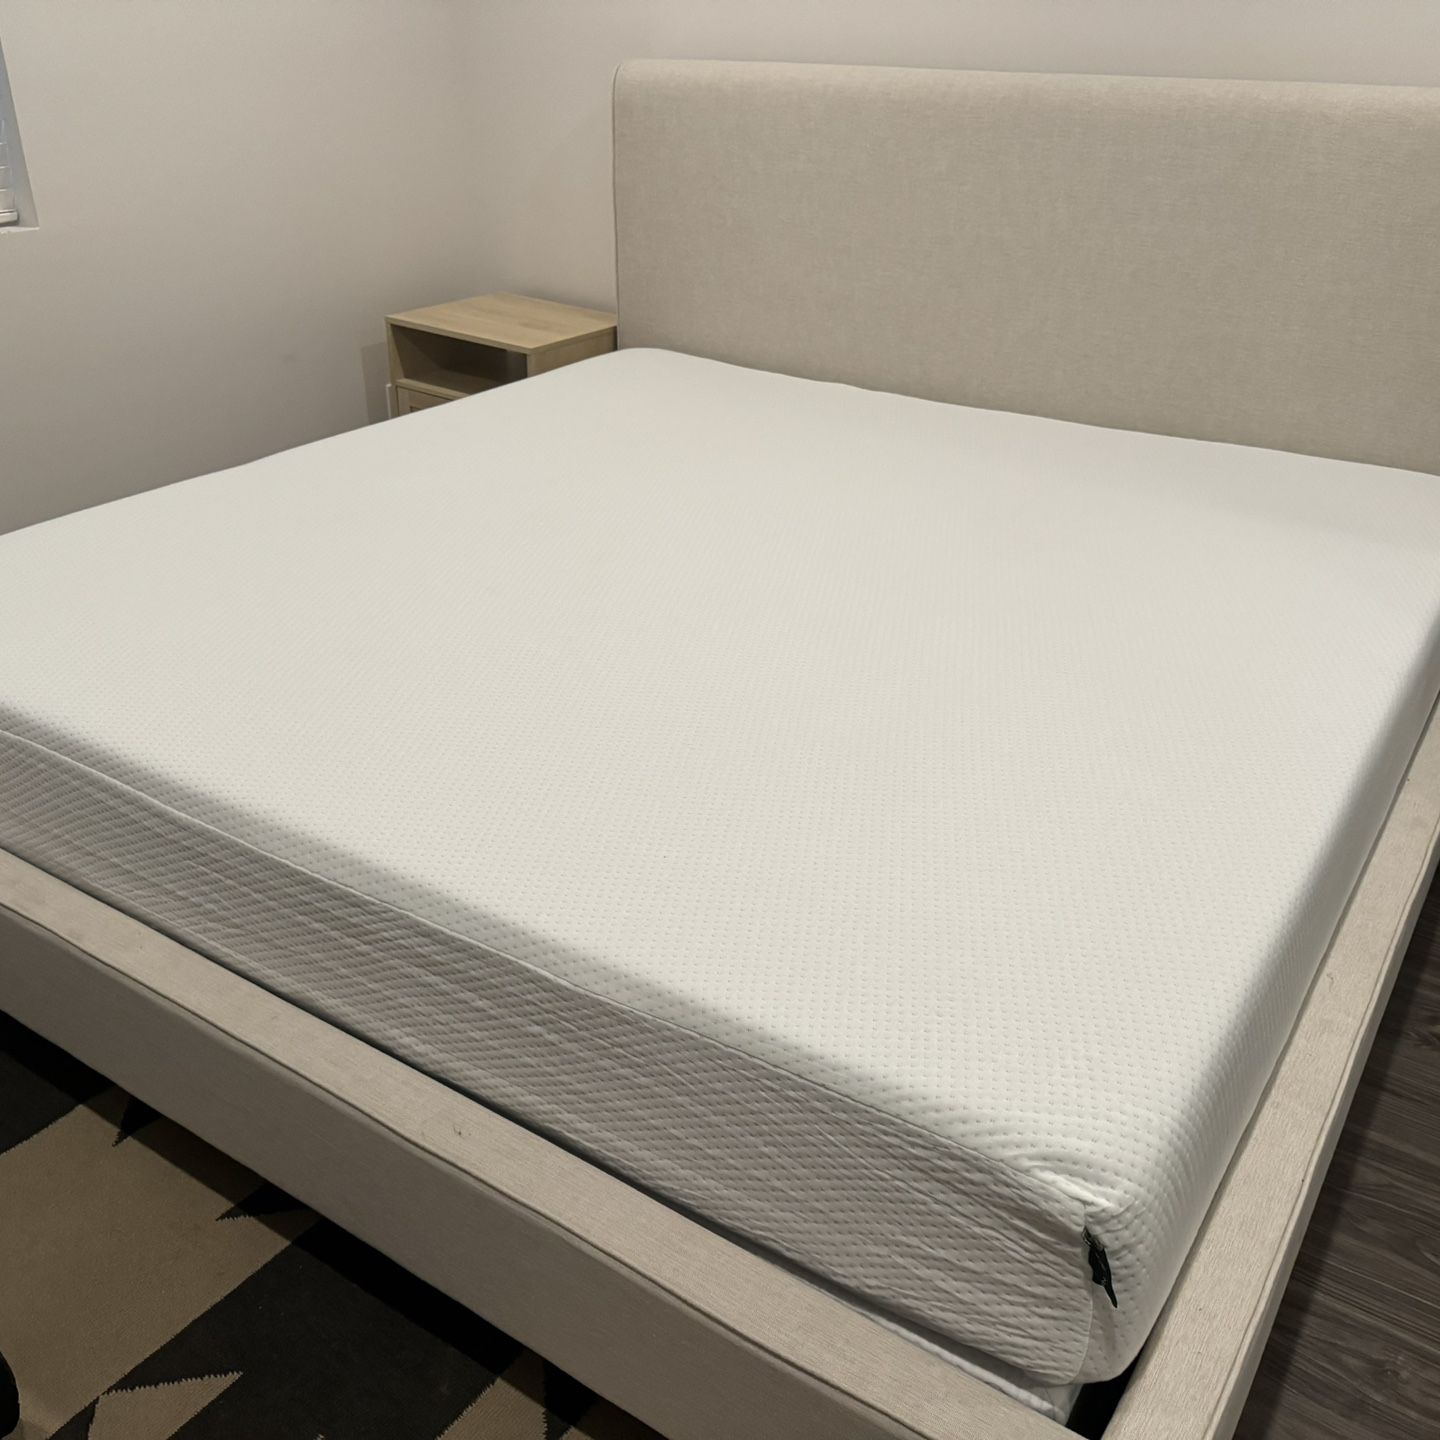 King size mattress (frame Not Included) 